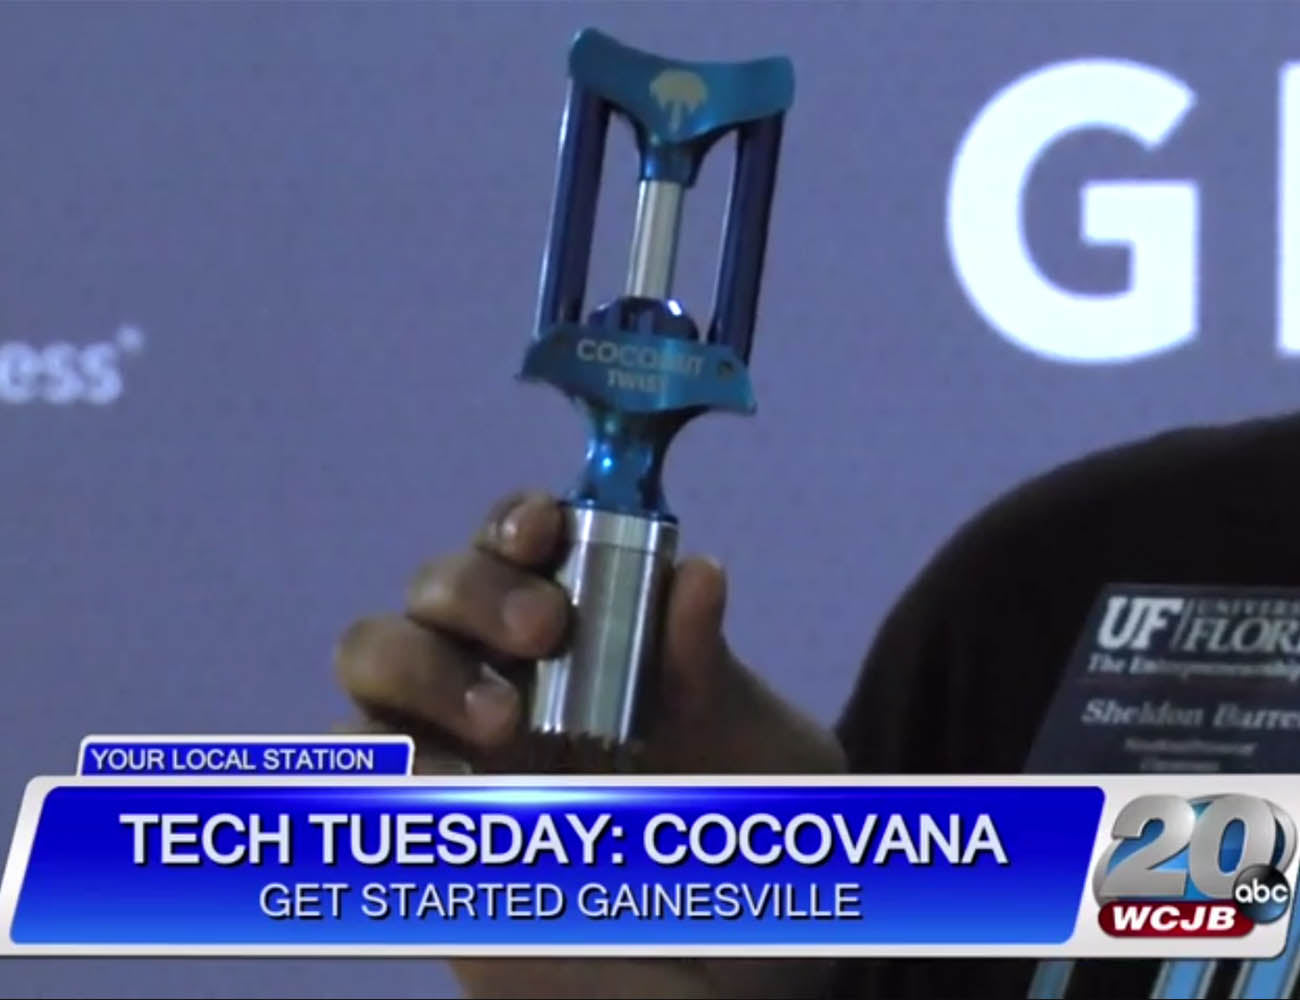 Cocovana Sheldon Barrett 2017 Get Started Gainesville Pitch Competition Cox Business Communications Coconut Twist ABC News Tech Tuesday WCJB TV20